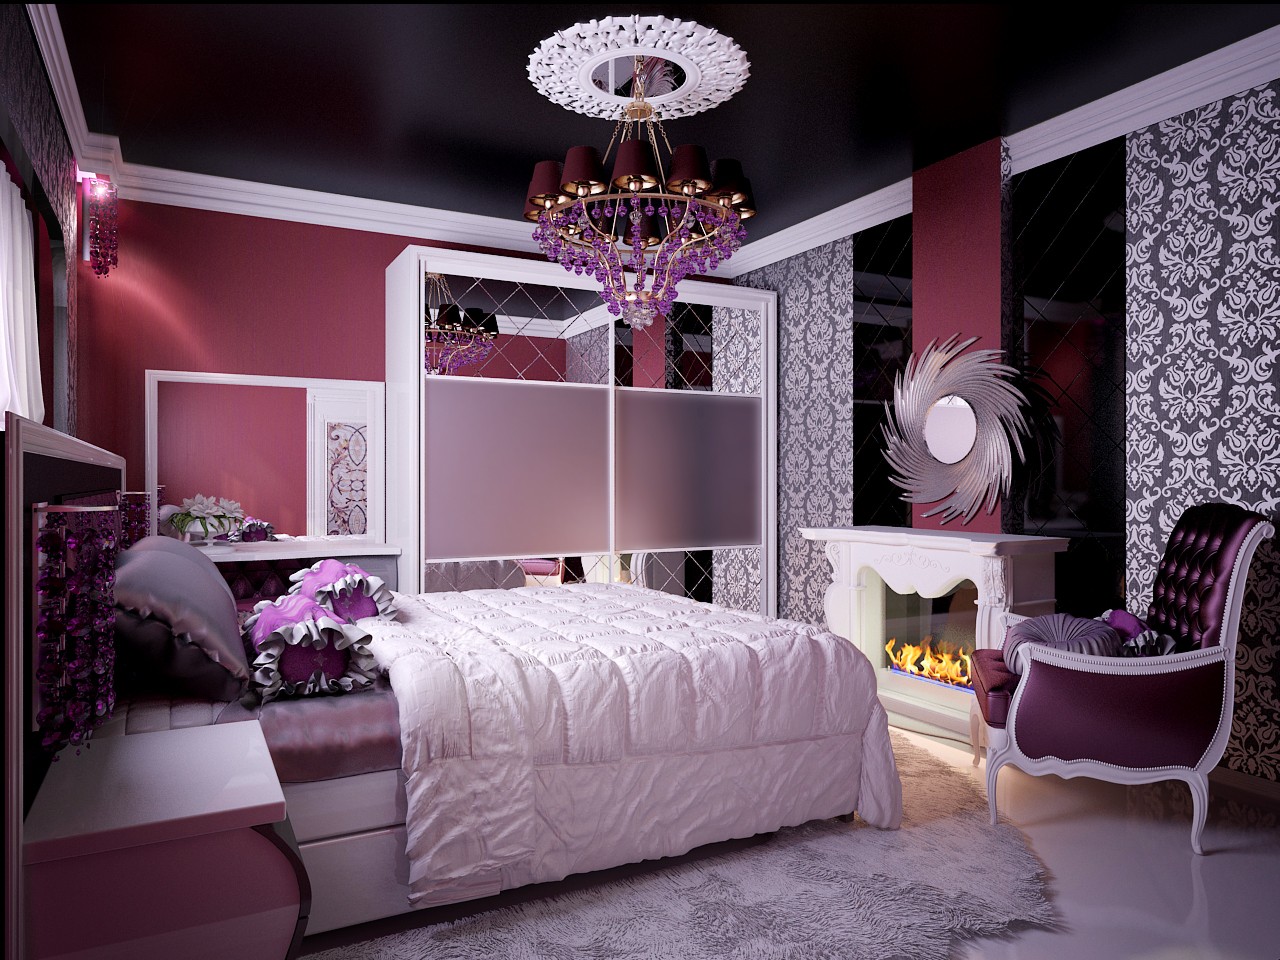 Images Of Bedroom Decor For Young Ladies